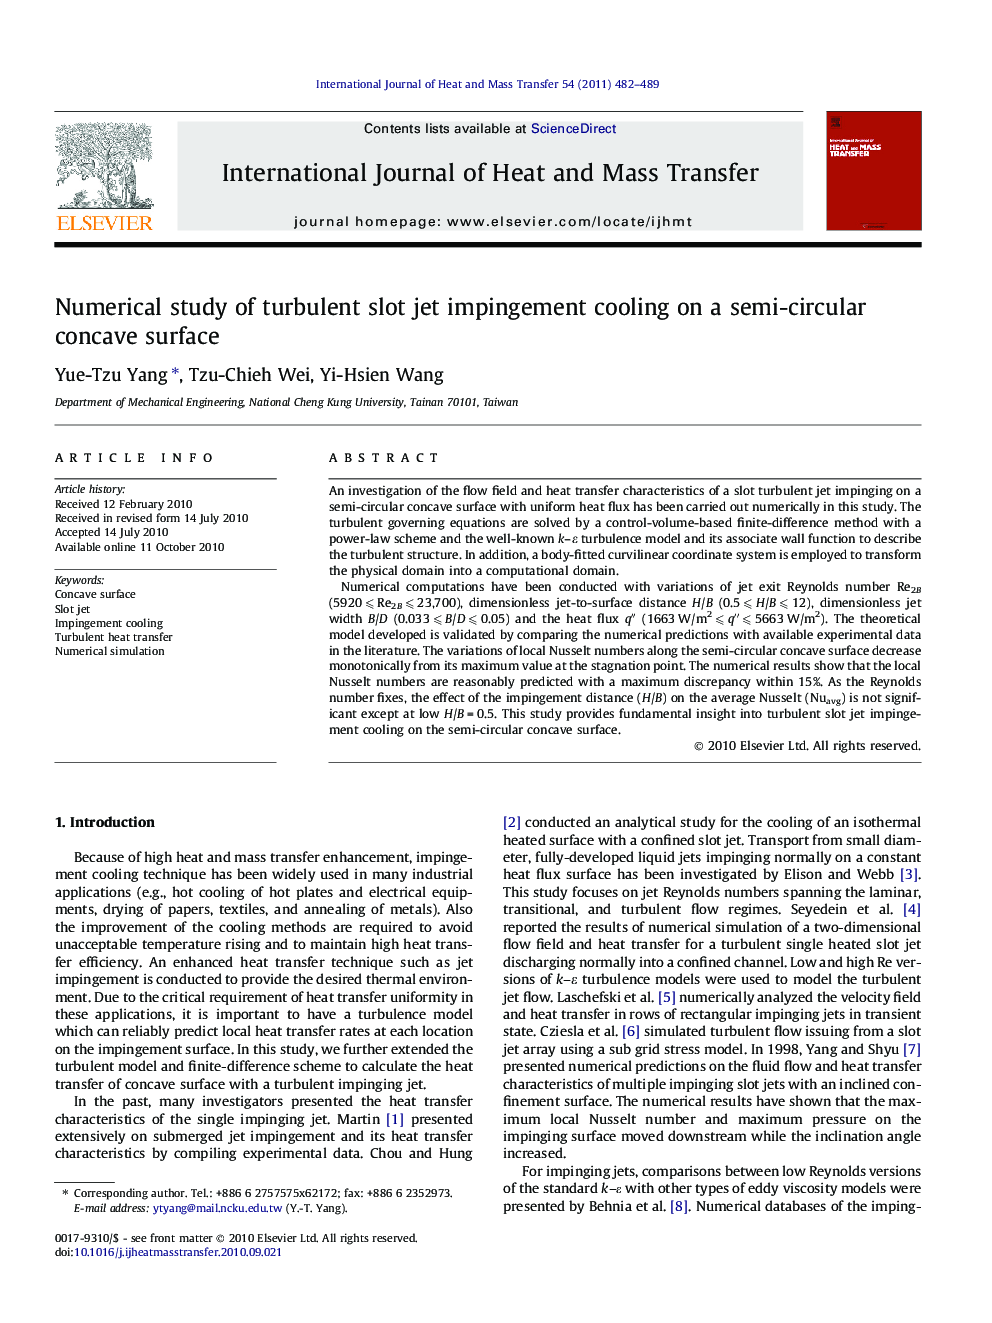 Numerical study of turbulent slot jet impingement cooling on a semi-circular concave surface